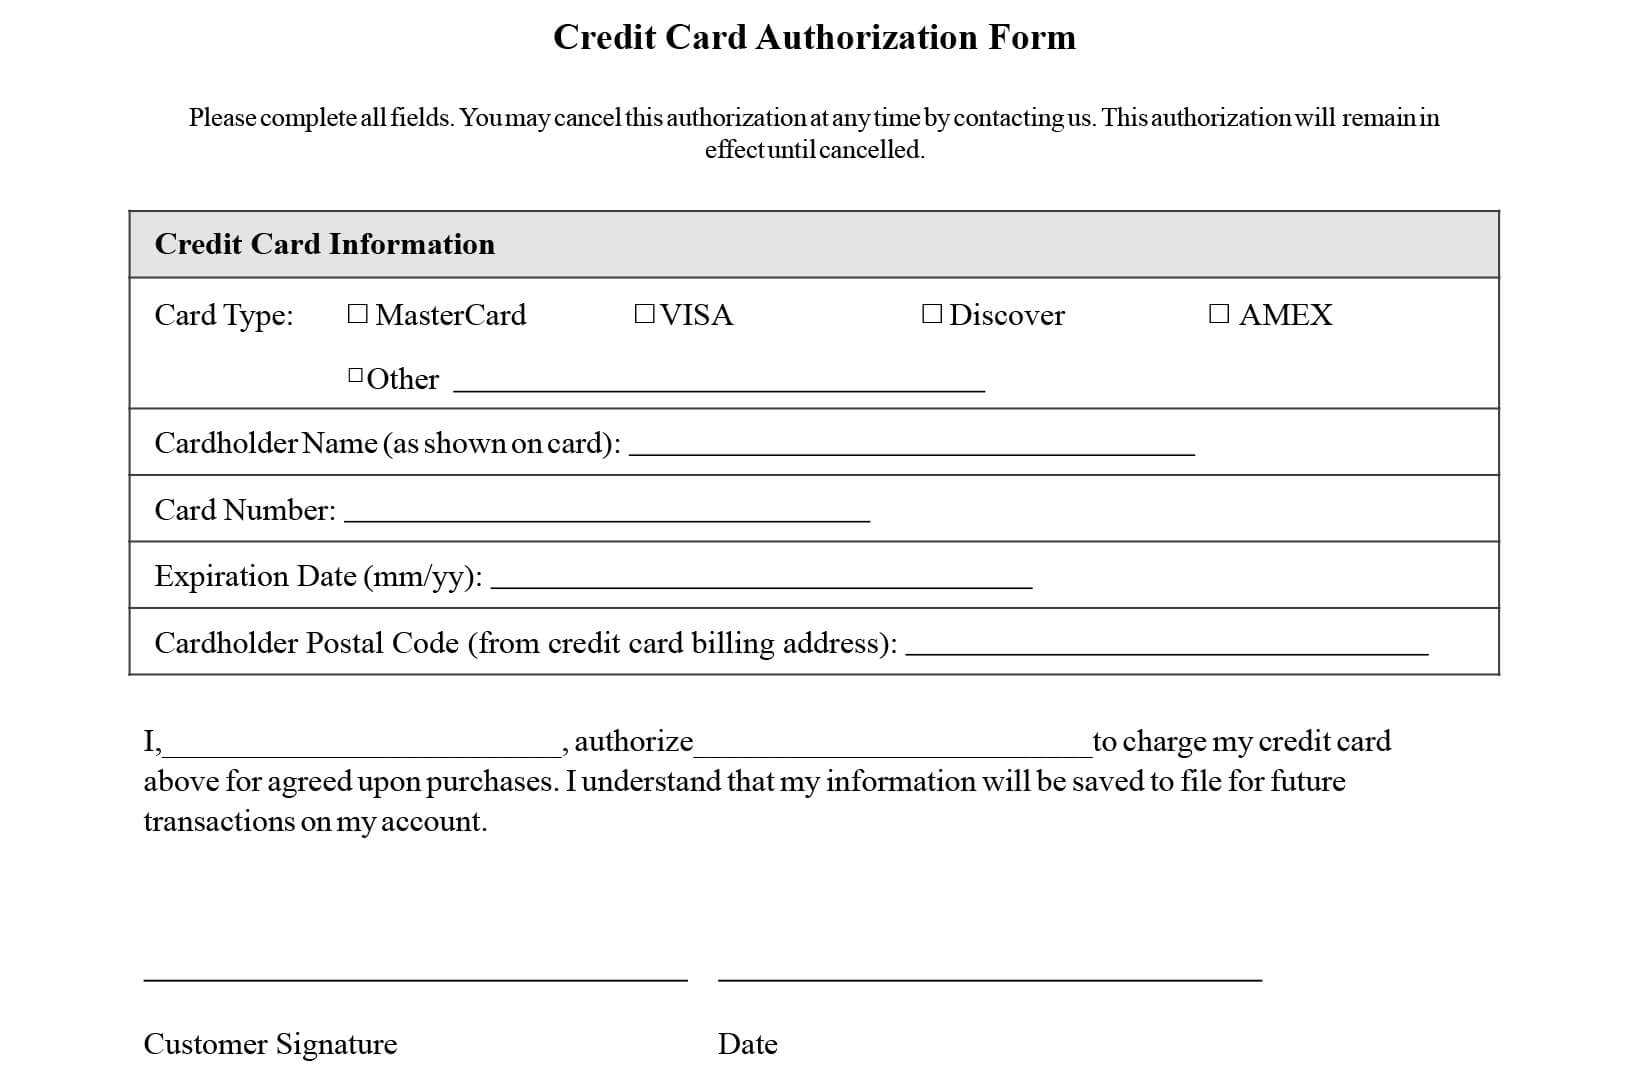 Credit Card Information Form Template - Zohre Within Authorization To Charge Credit Card Template